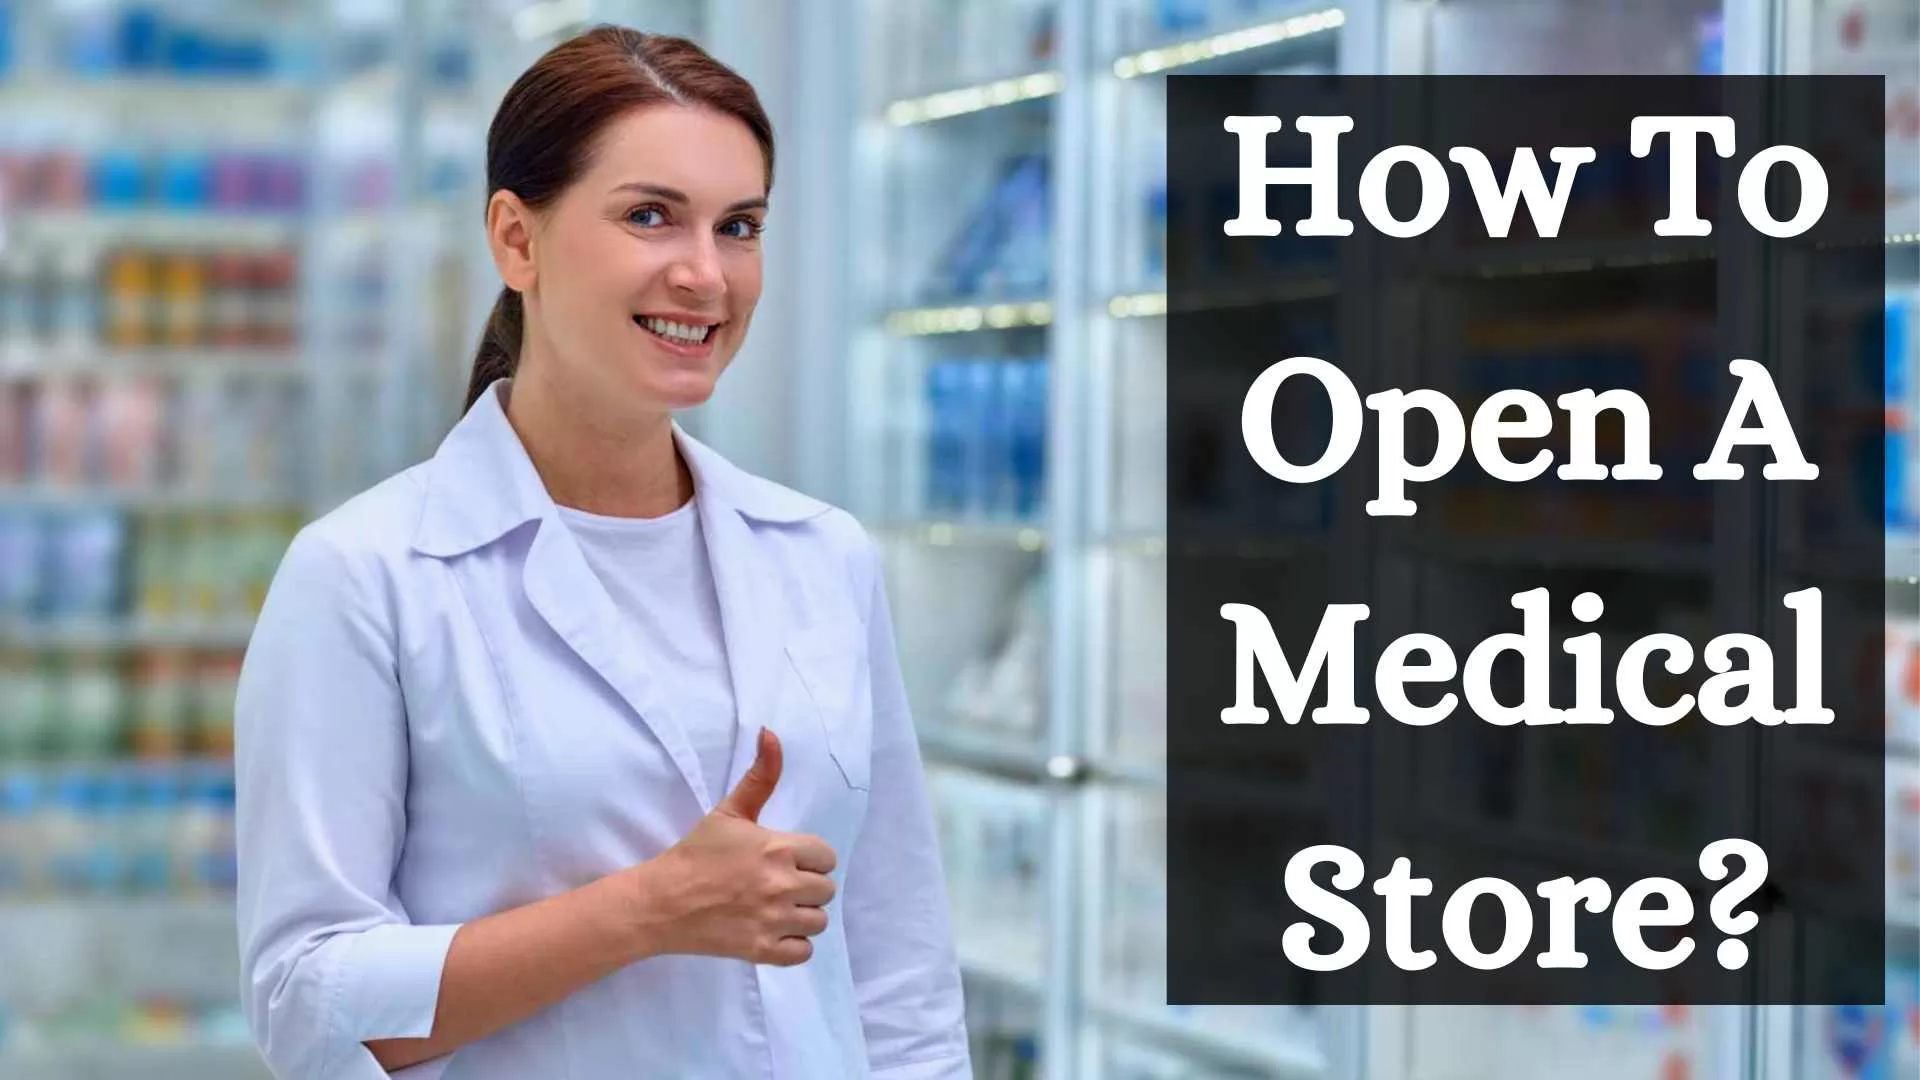 How To Open A Medical Store